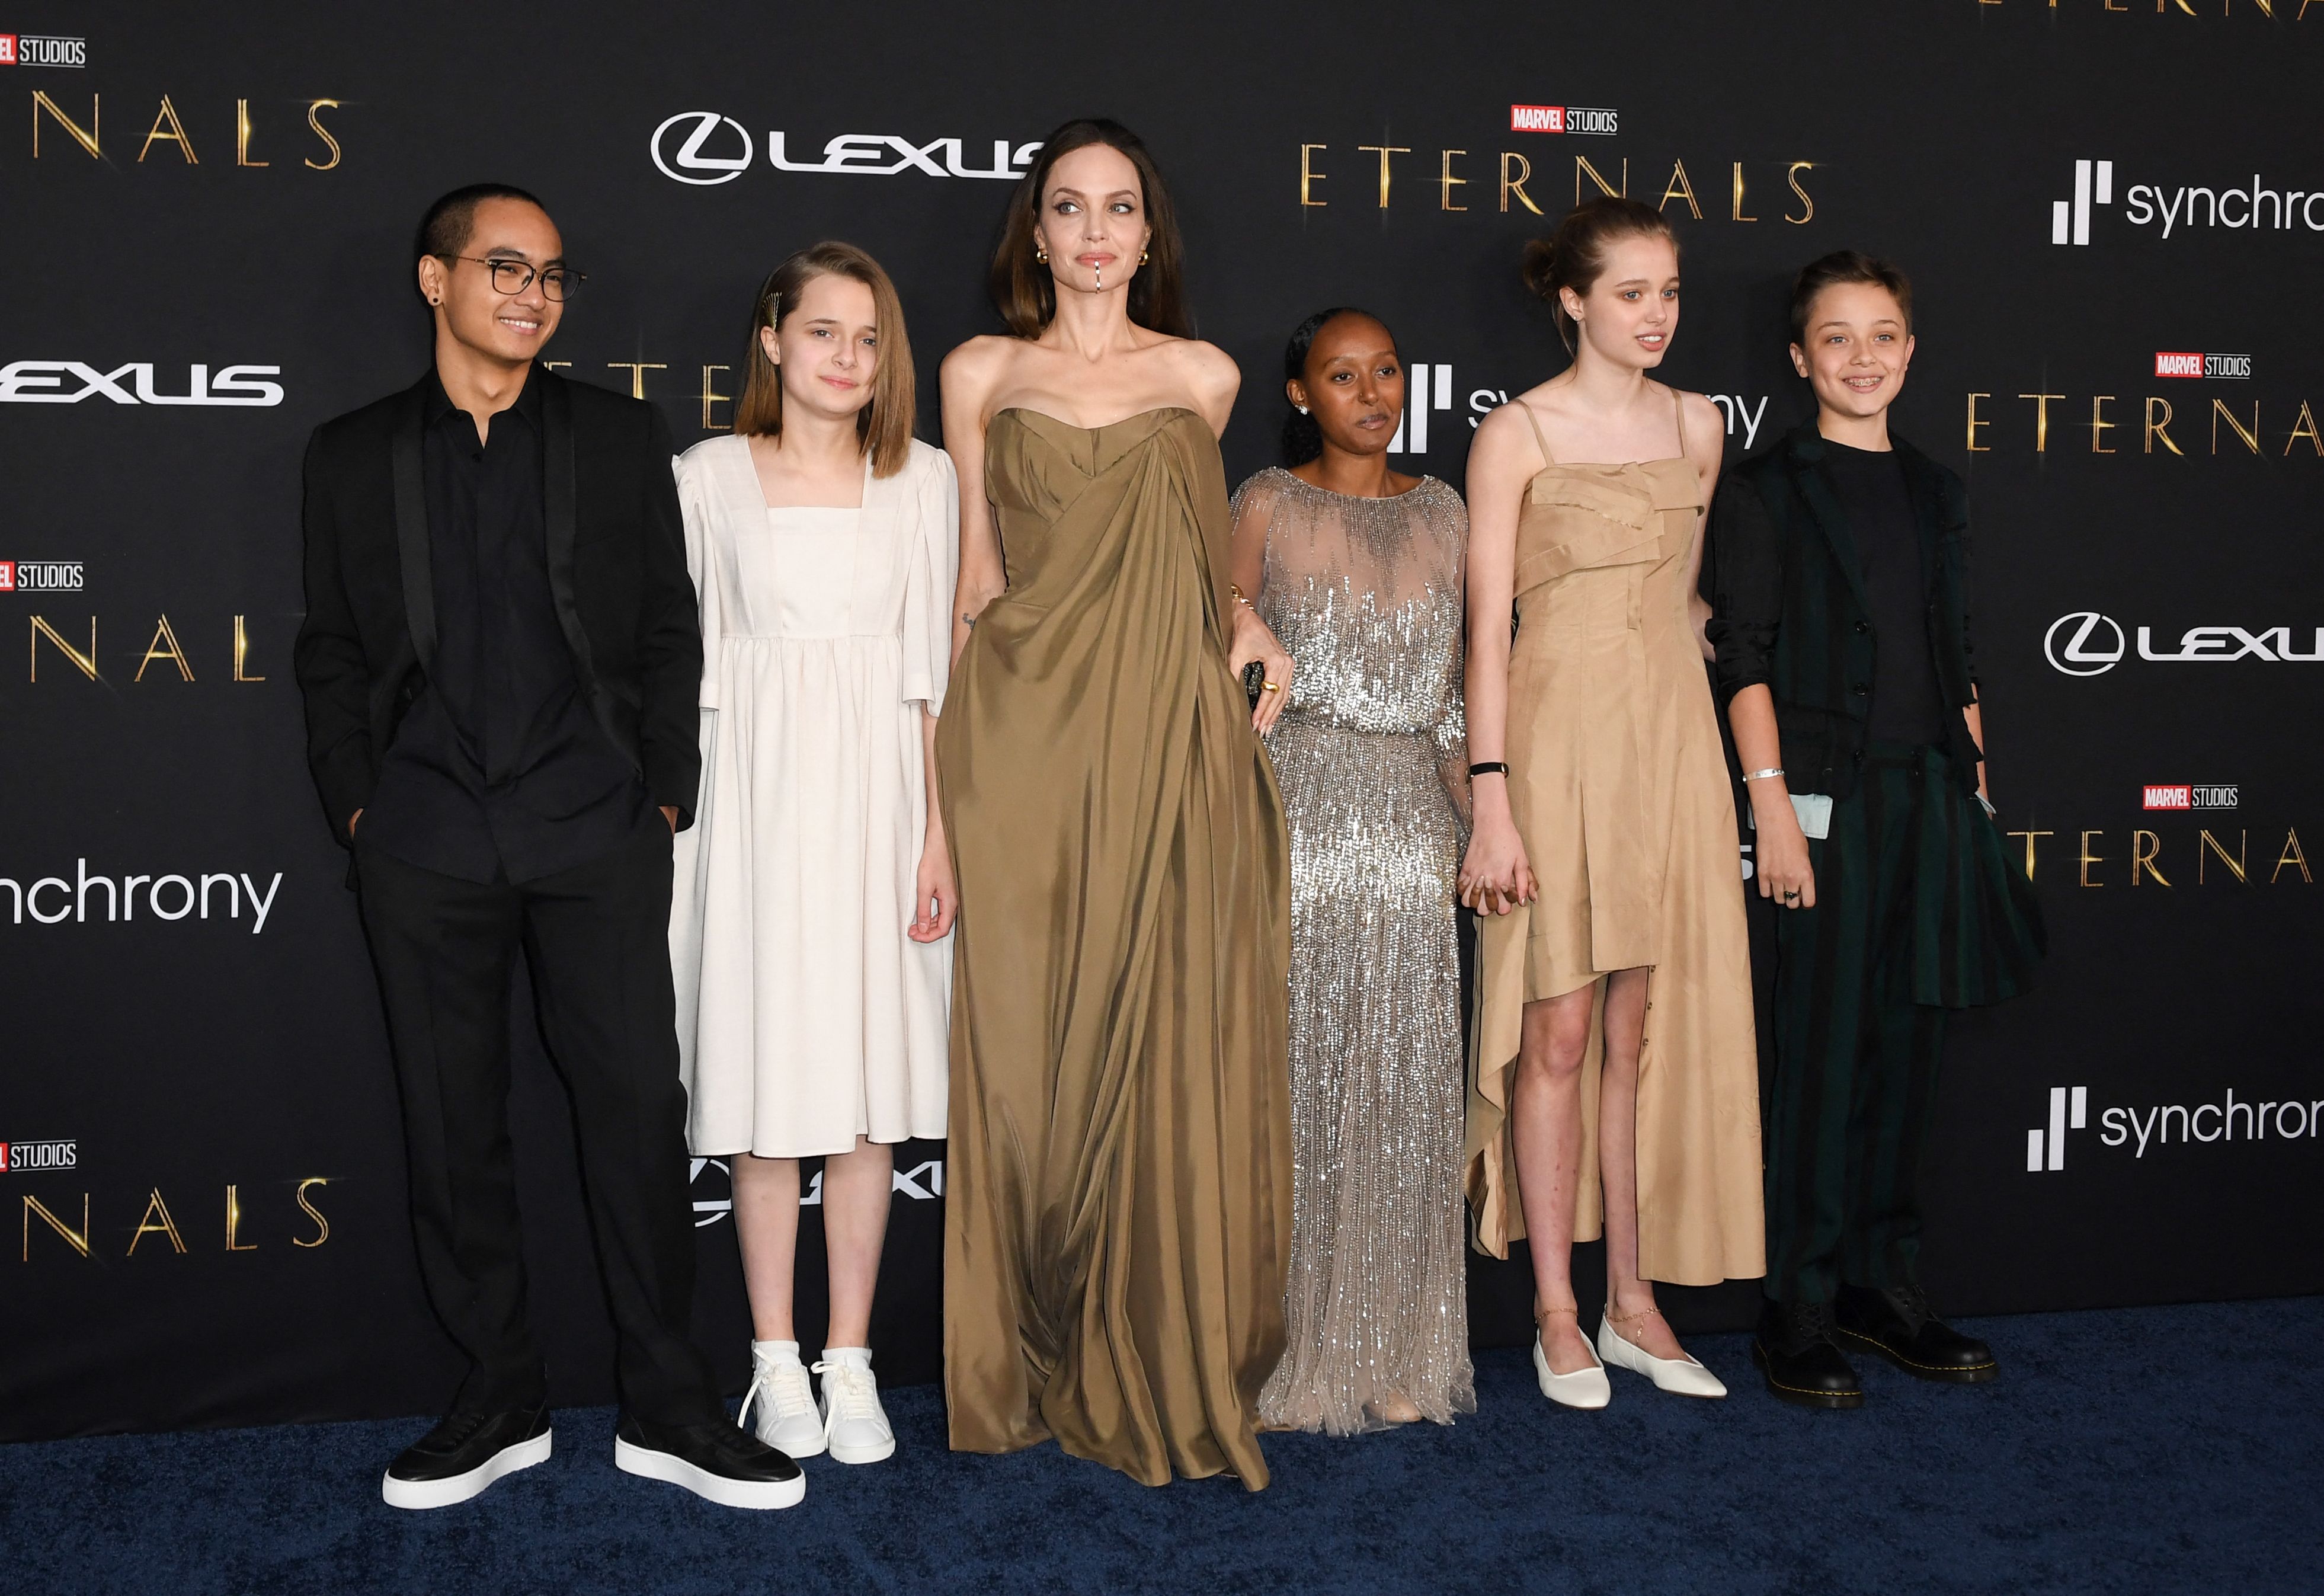 Angelina Jolie attends Eternals premiere with her five children, makes it a family night out. See pics | Hollywood - Hindustan Times